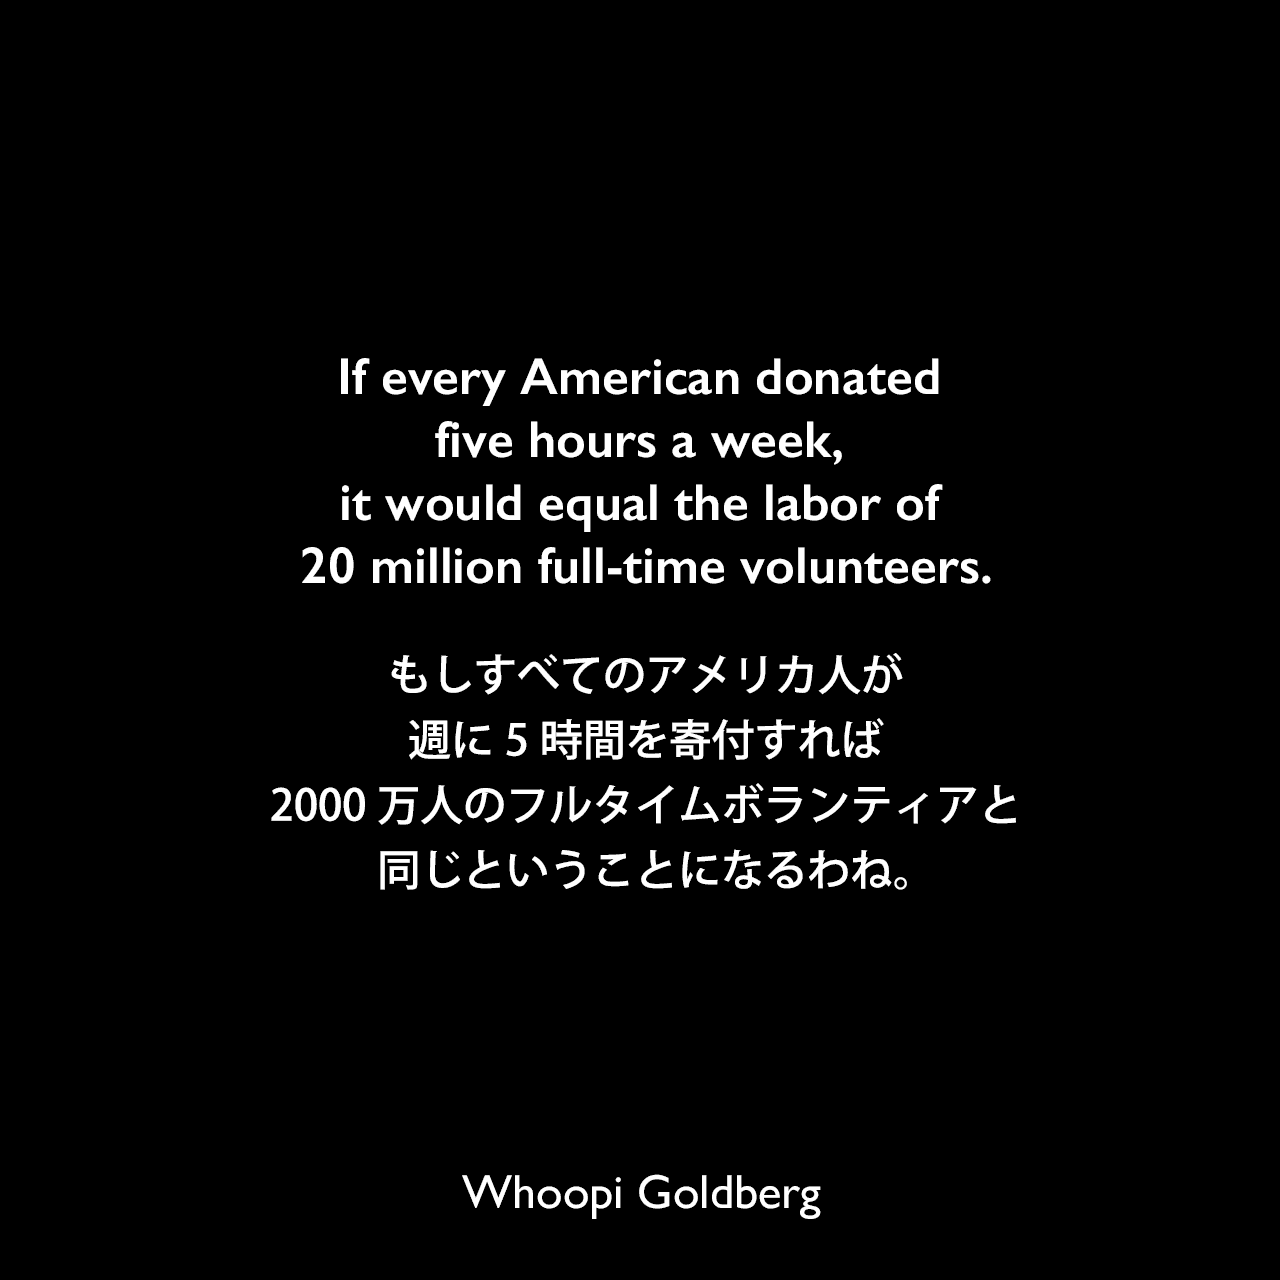 If every American donated five hours a week, it would equal the labor of 20 million full-time volunteers.もしすべてのアメリカ人が週に5時間を寄付すれば、2000万人のフルタイムボランティアと同じということになるわね。Whoopi Goldberg